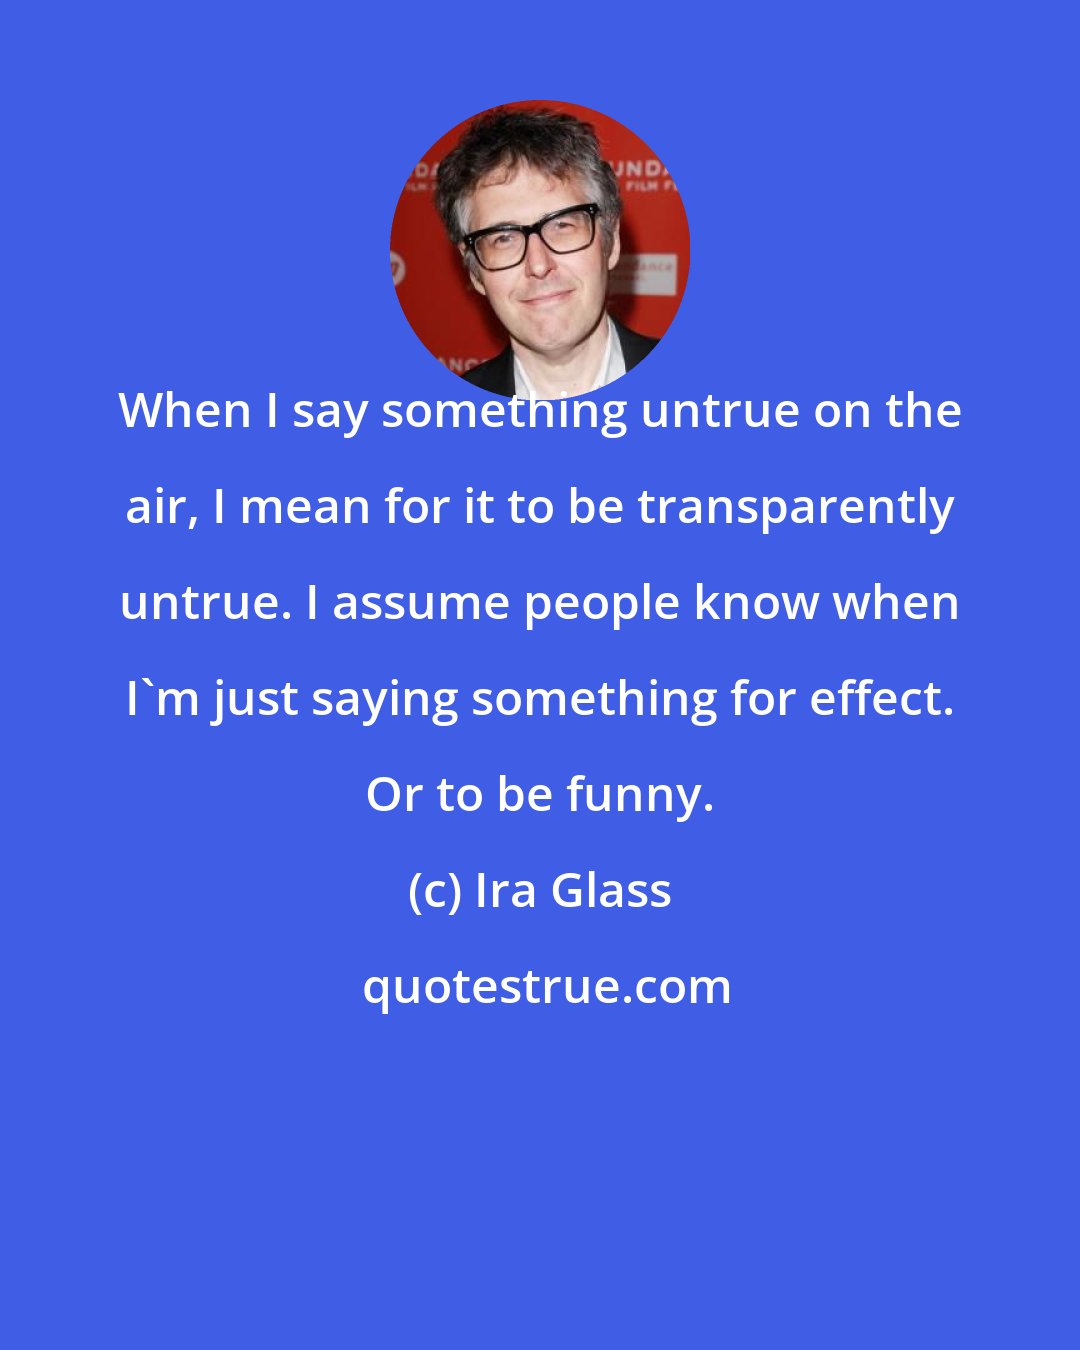 Ira Glass: When I say something untrue on the air, I mean for it to be transparently untrue. I assume people know when I'm just saying something for effect. Or to be funny.